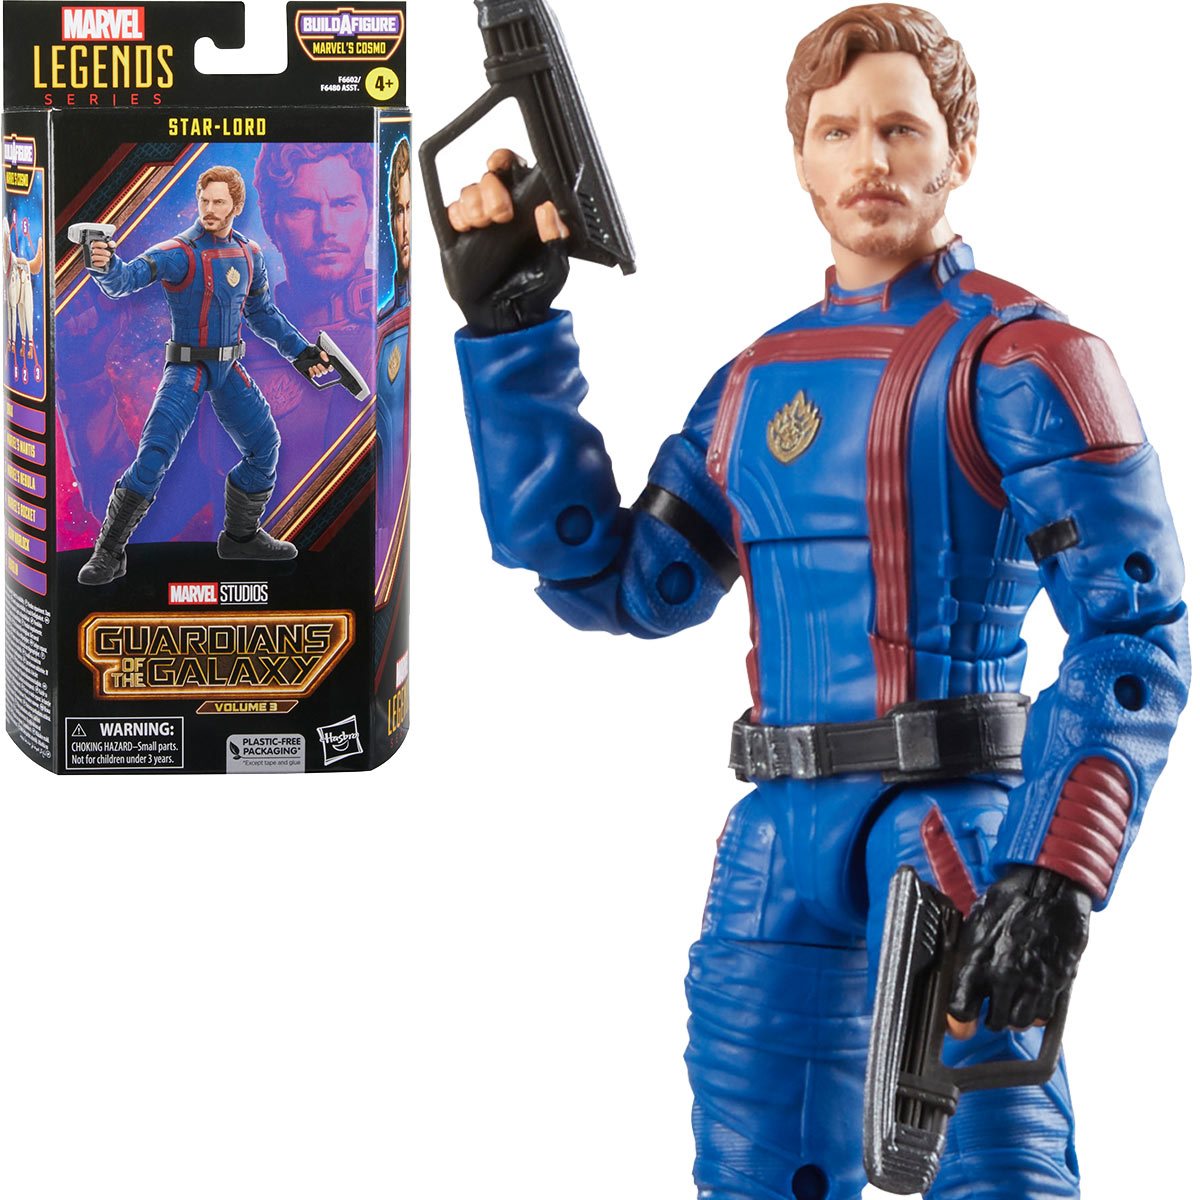 Guardians of the Galaxy Vol. 3 Marvel Legends Star-Lord Hasbro